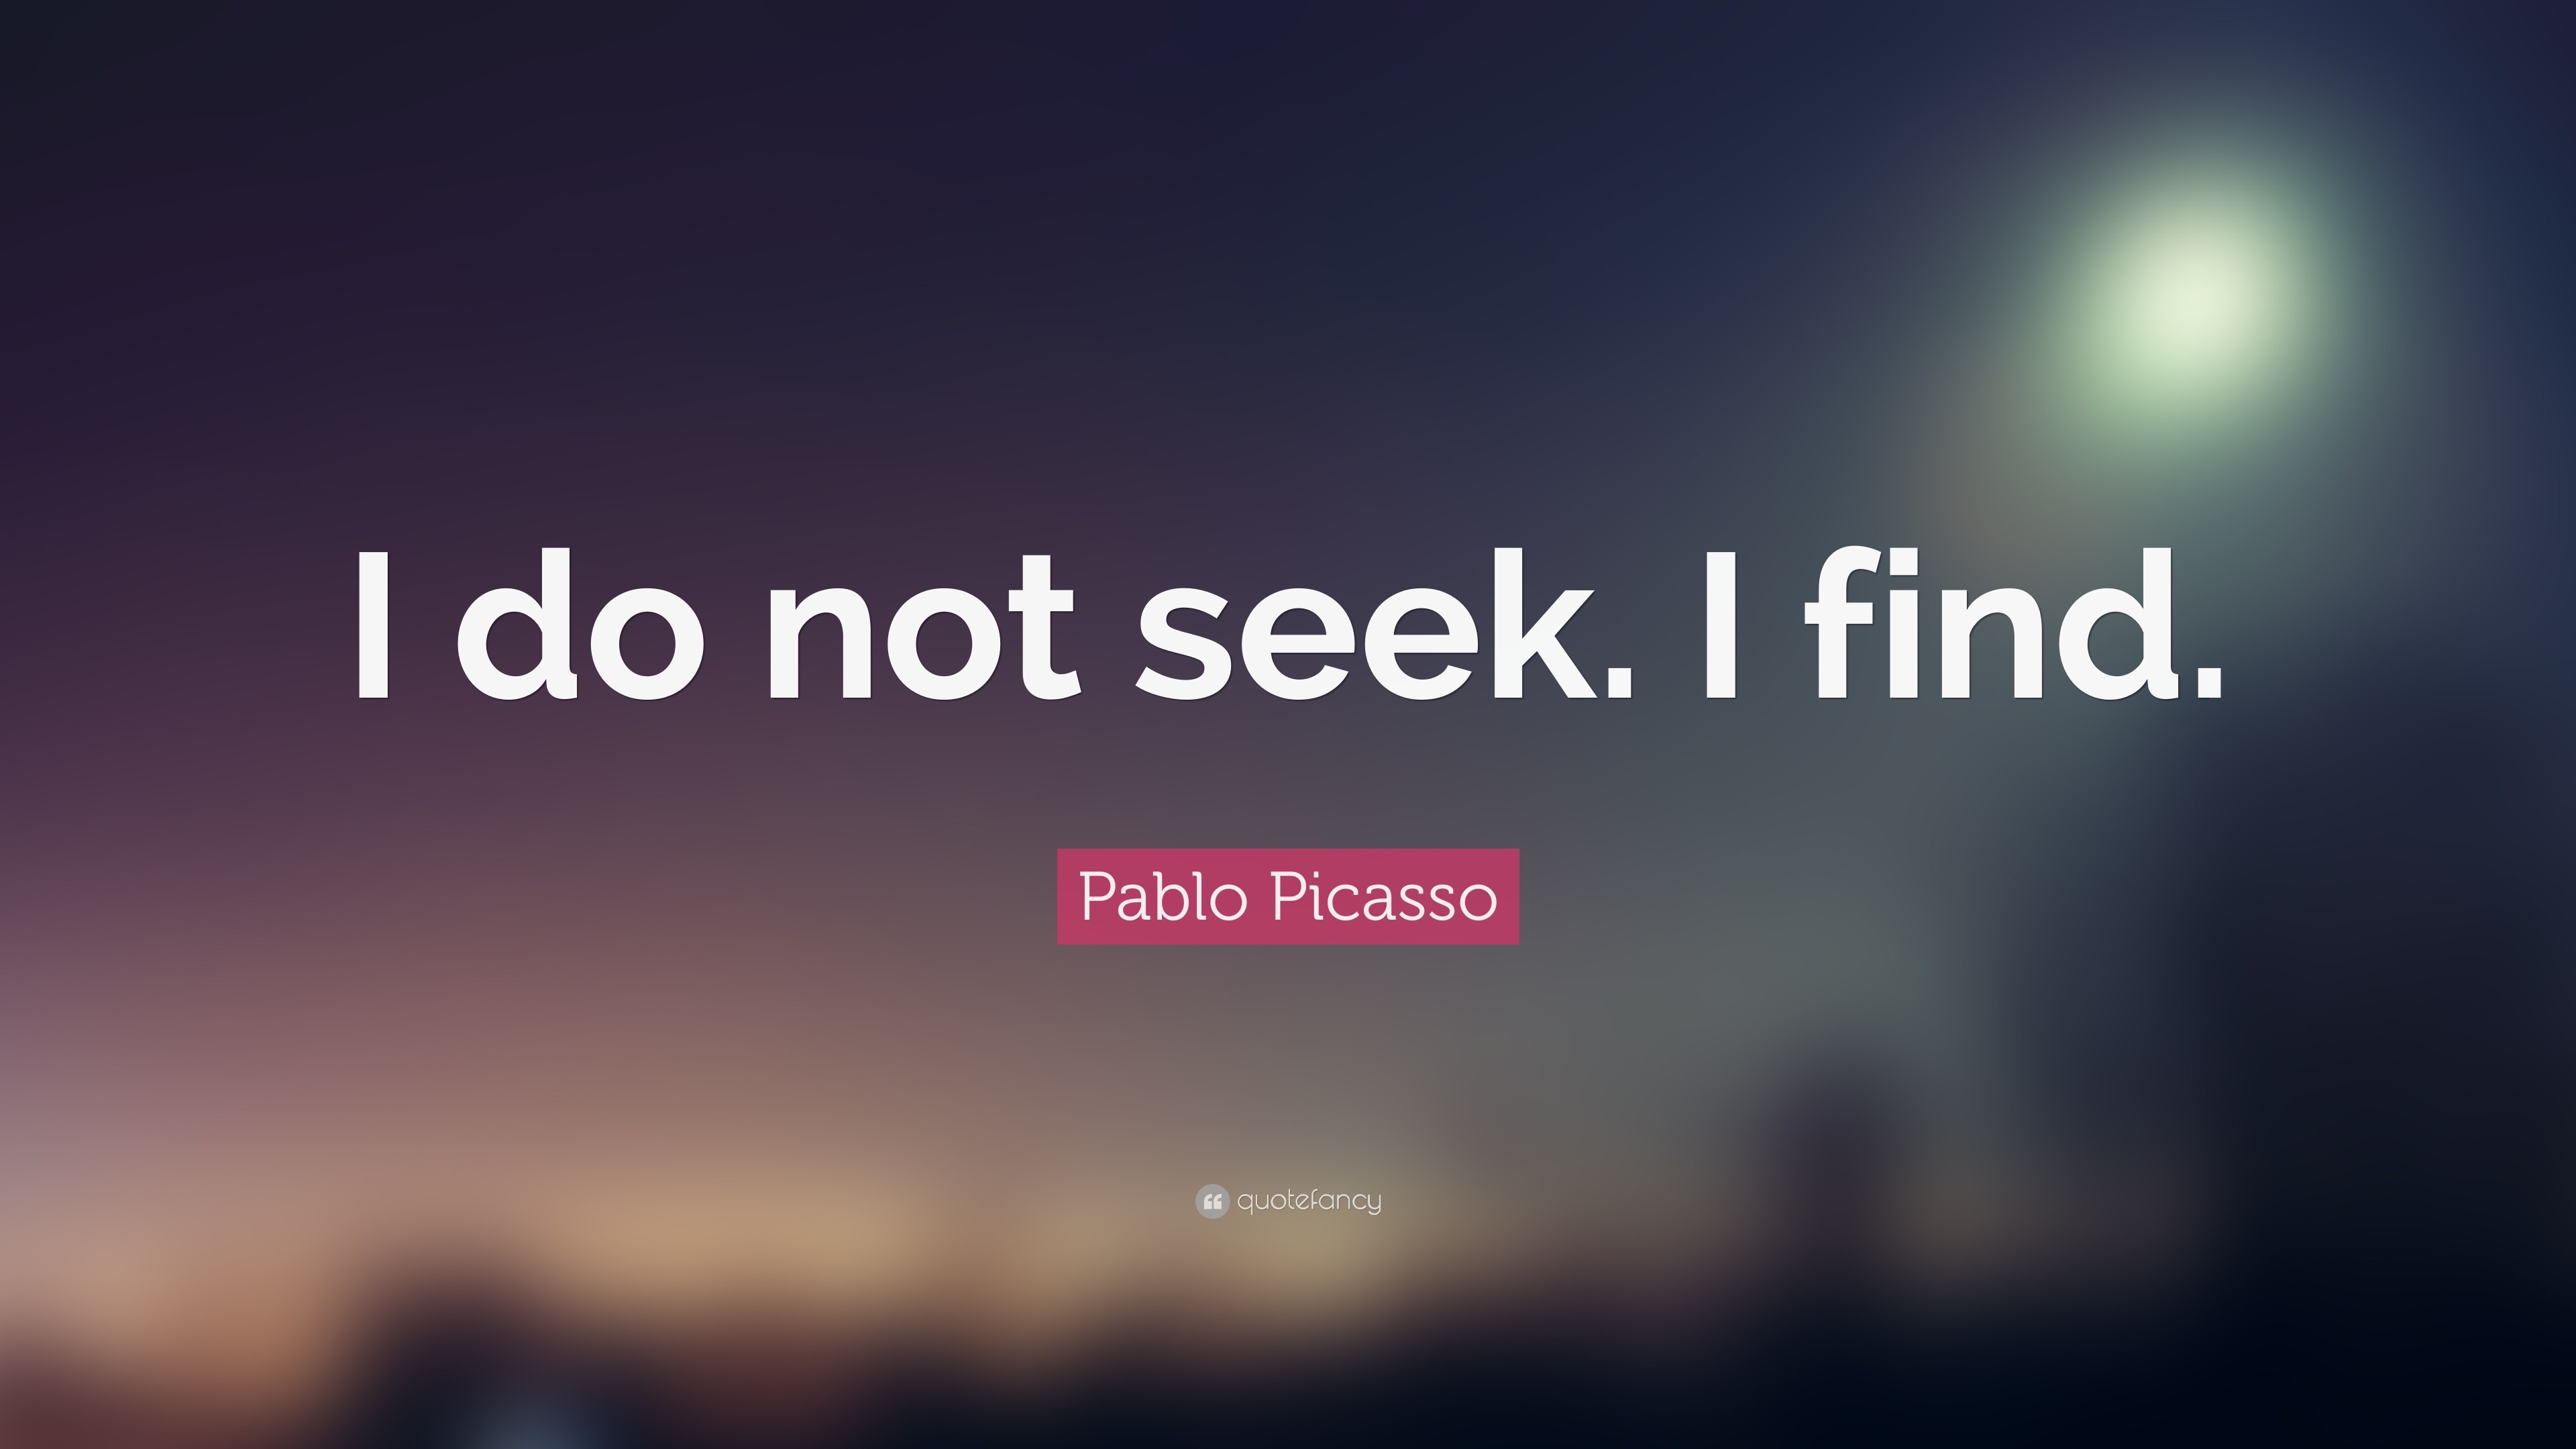 3840x2160 Creativity Quotes: “I do not seek. I find.” — Pablo Picasso